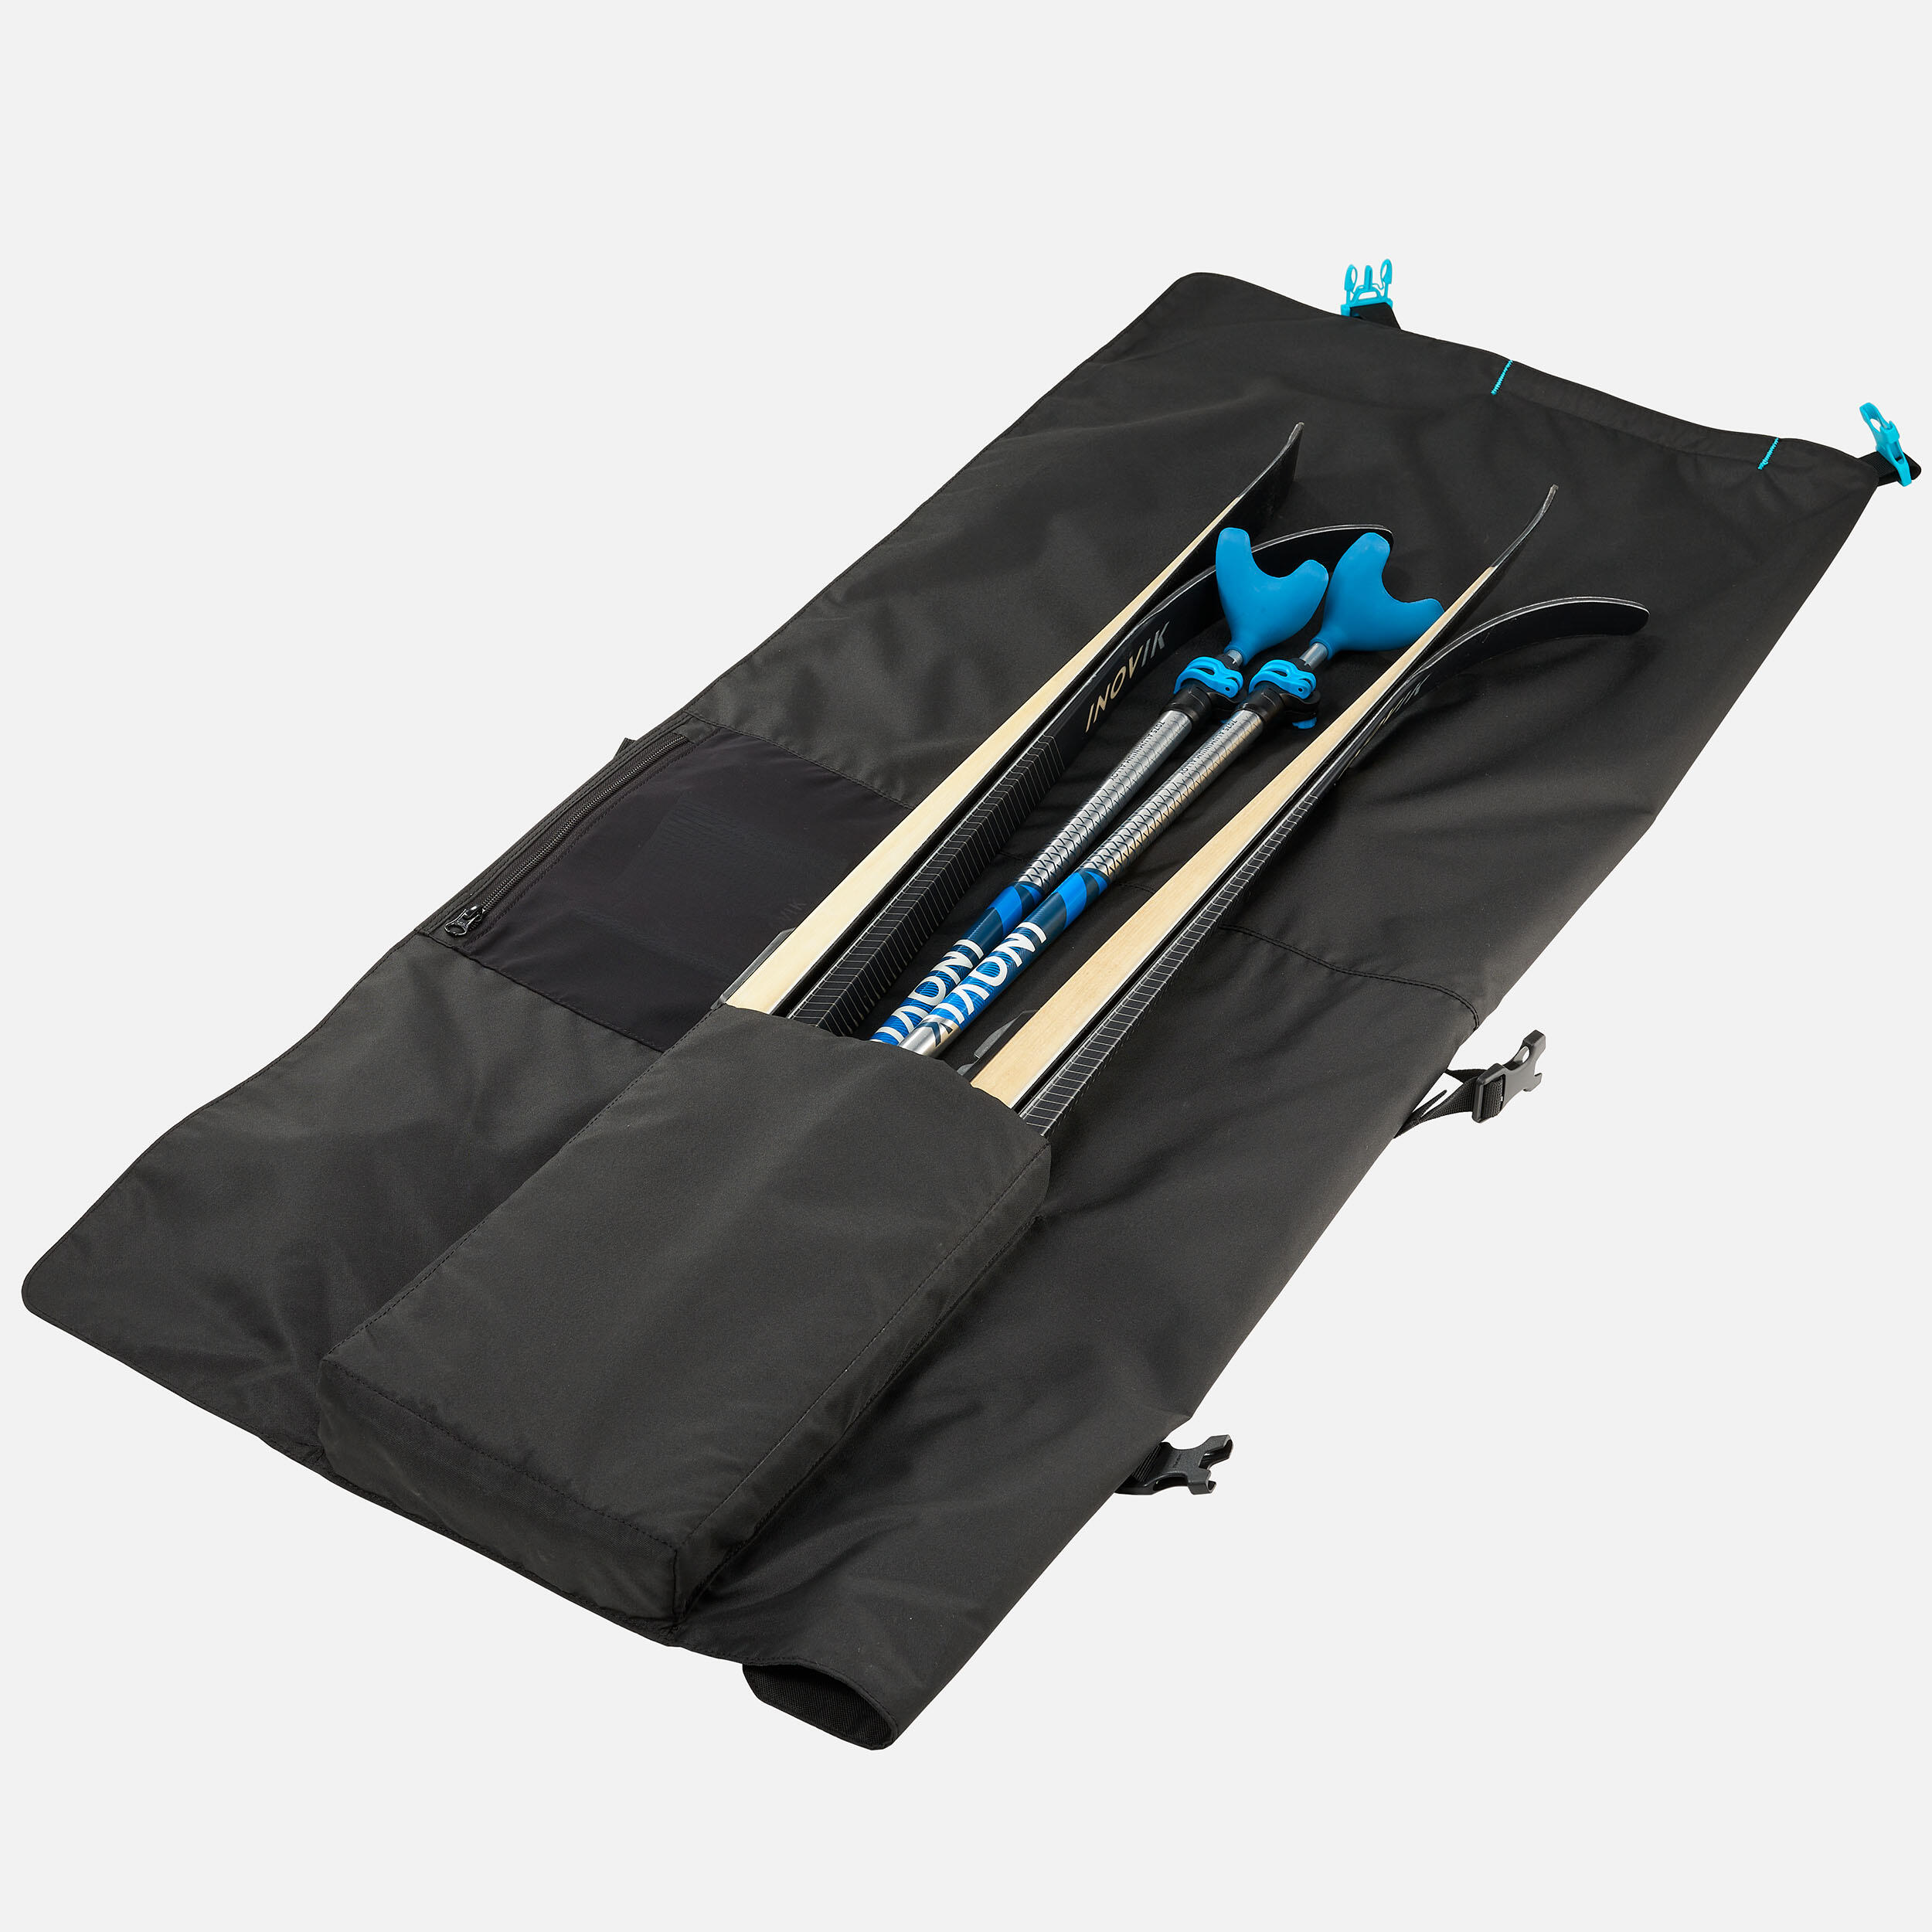 CROSS-COUNTRY SKI COVER - 150 COMPACT 4/10